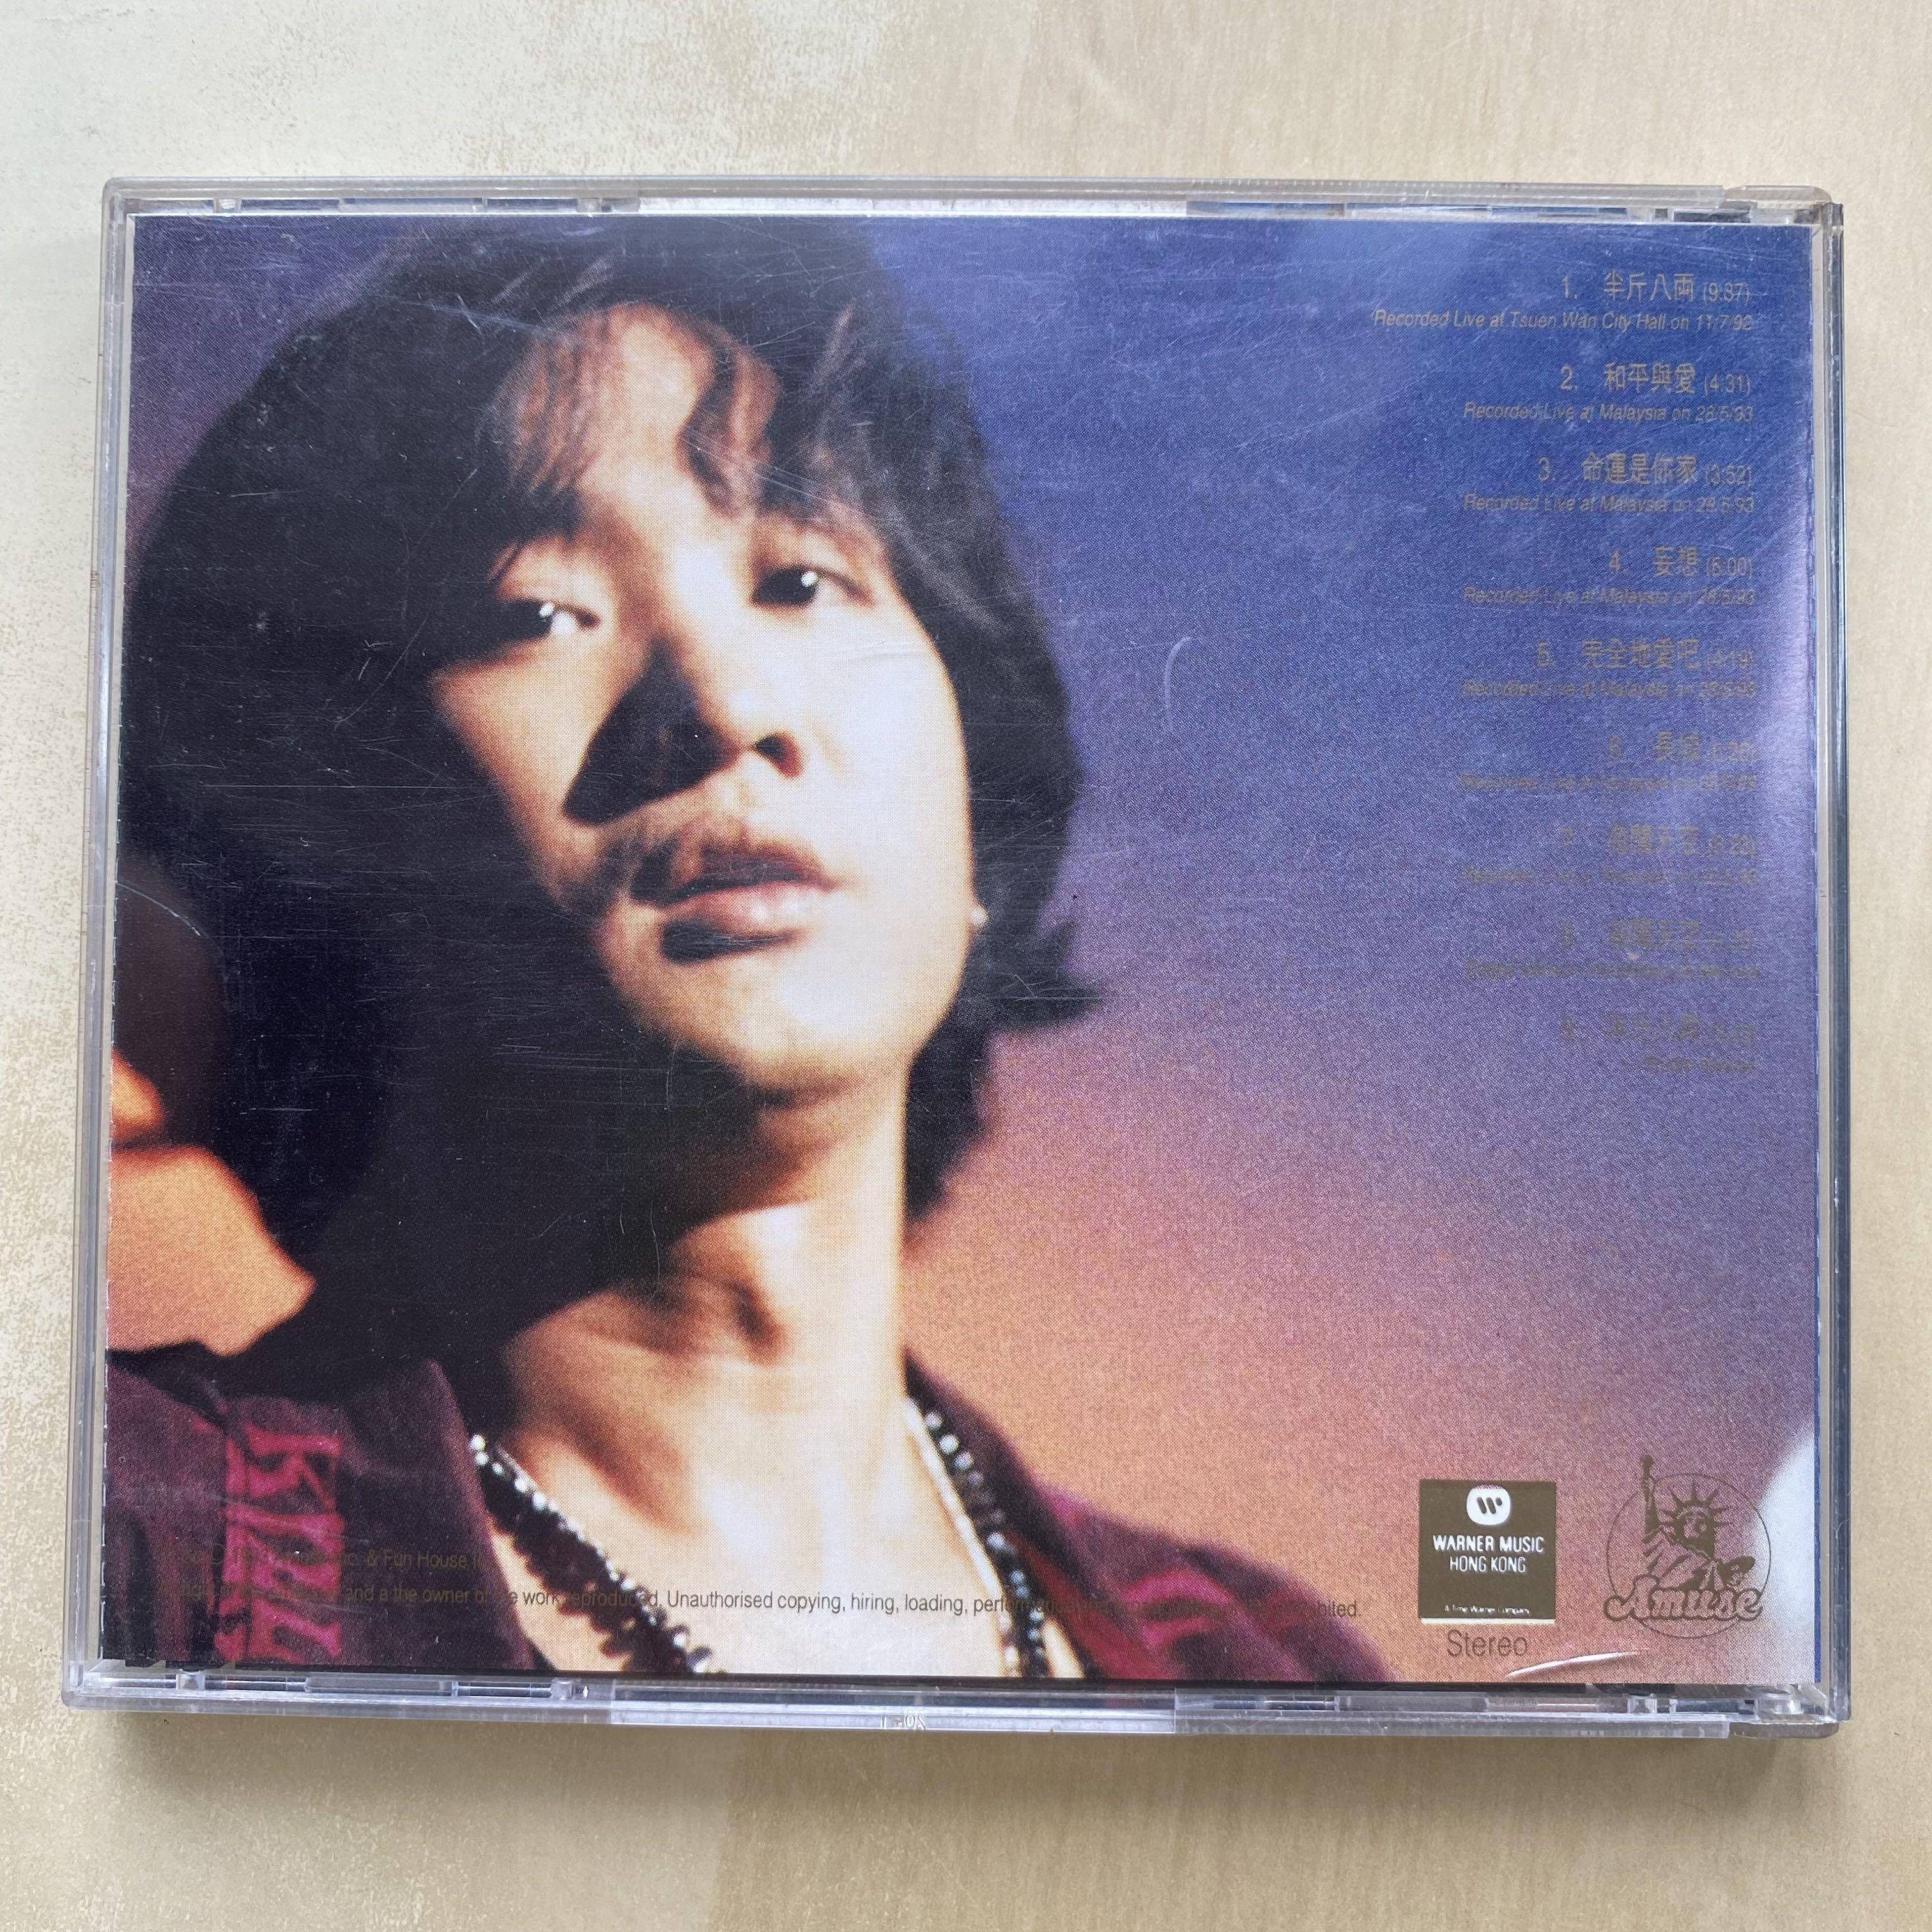 BEYOND CD FINANCIAL LIVE WITH家駒 - CD